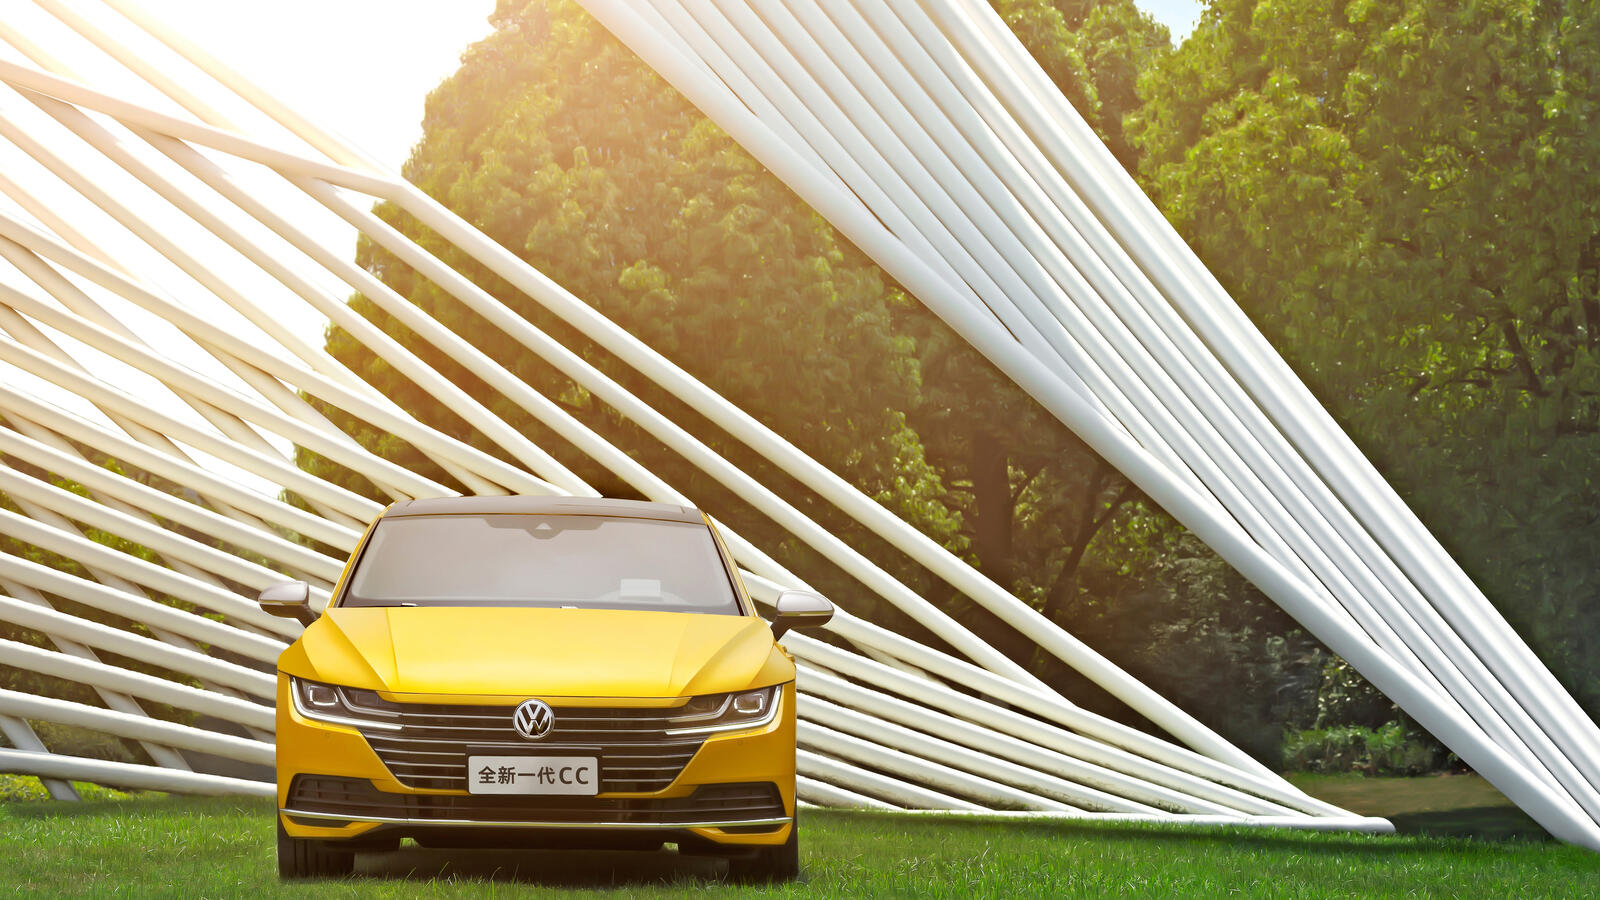 Wallpapers Volkswagen CС yellow on the lawn weed on the desktop